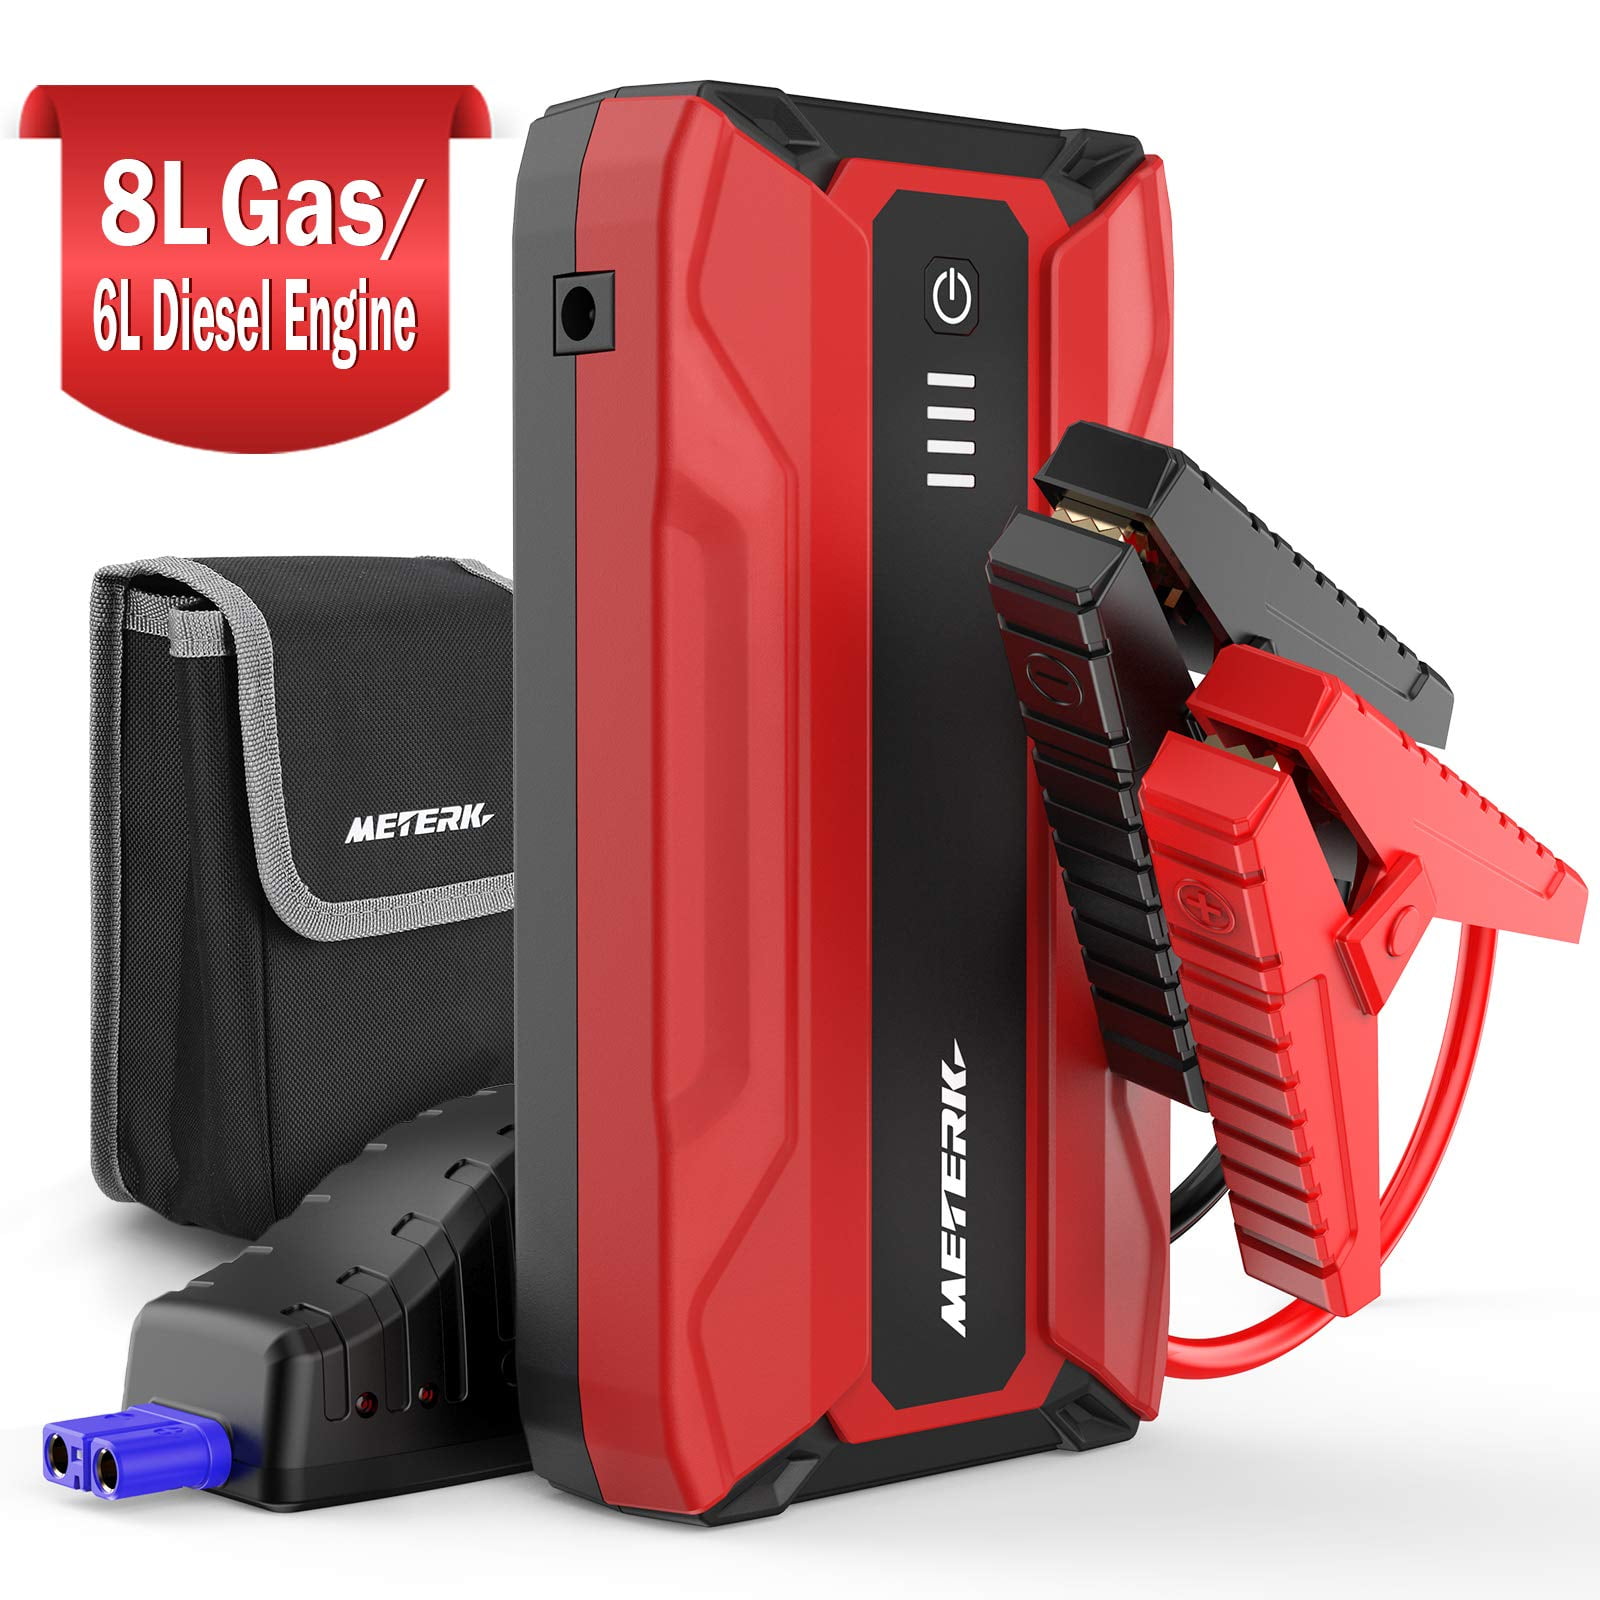 ,Digital LCD Screen Car Power Bank,Blue with Wireless Charging Function,12V 1500A Auto Battery Booster 22000Mah Car Jump Starter Up To 5.0L Gas And 6.0L Diesel